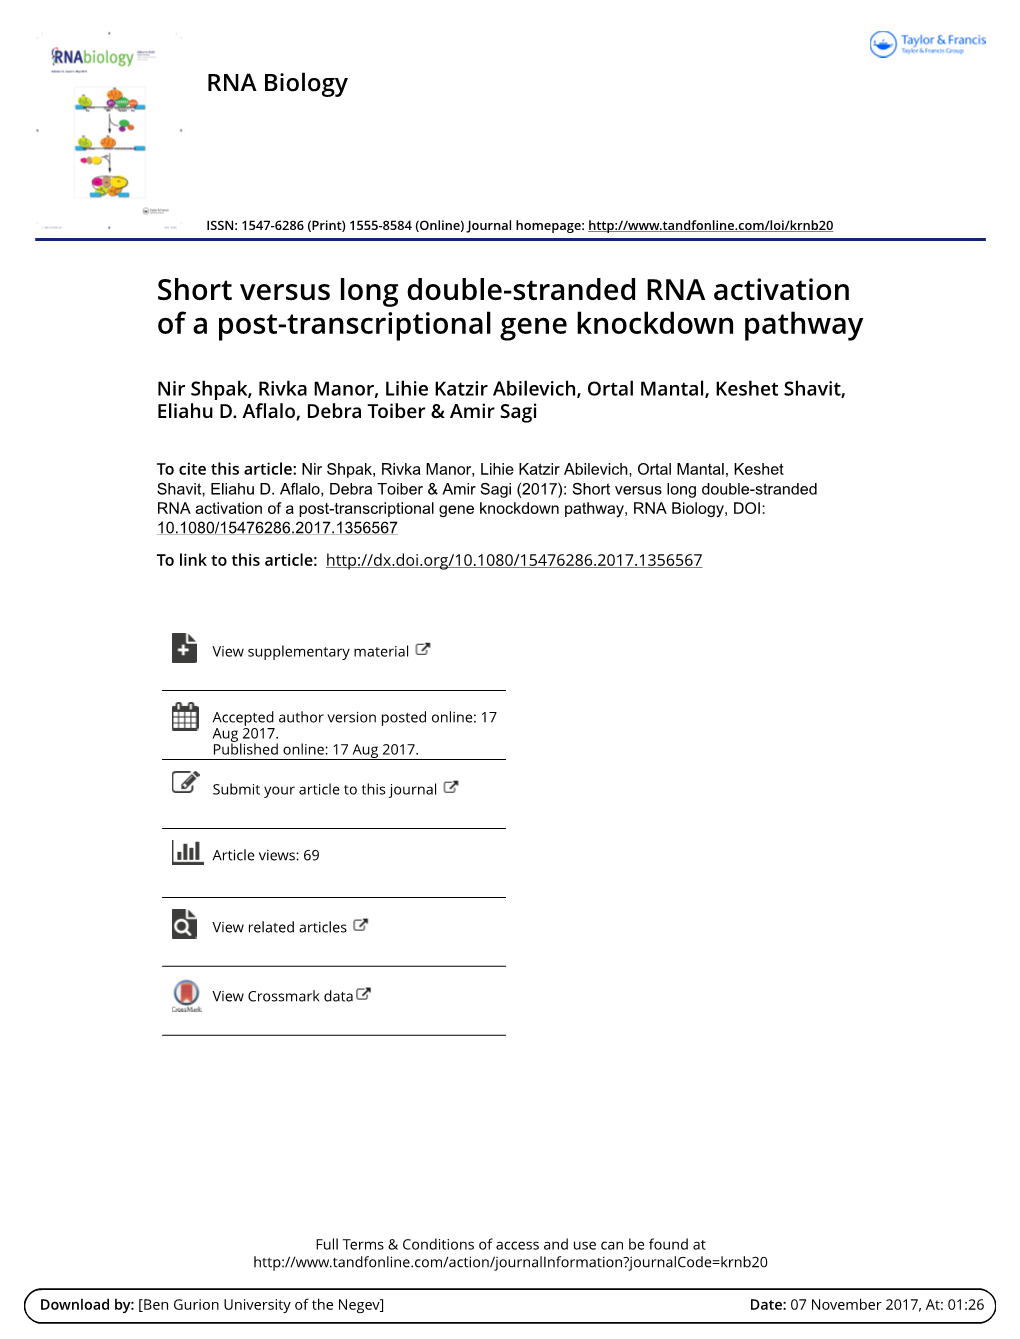 Short Versus Long Double-Stranded RNA Activation of a Post-Transcriptional Gene Knockdown Pathway